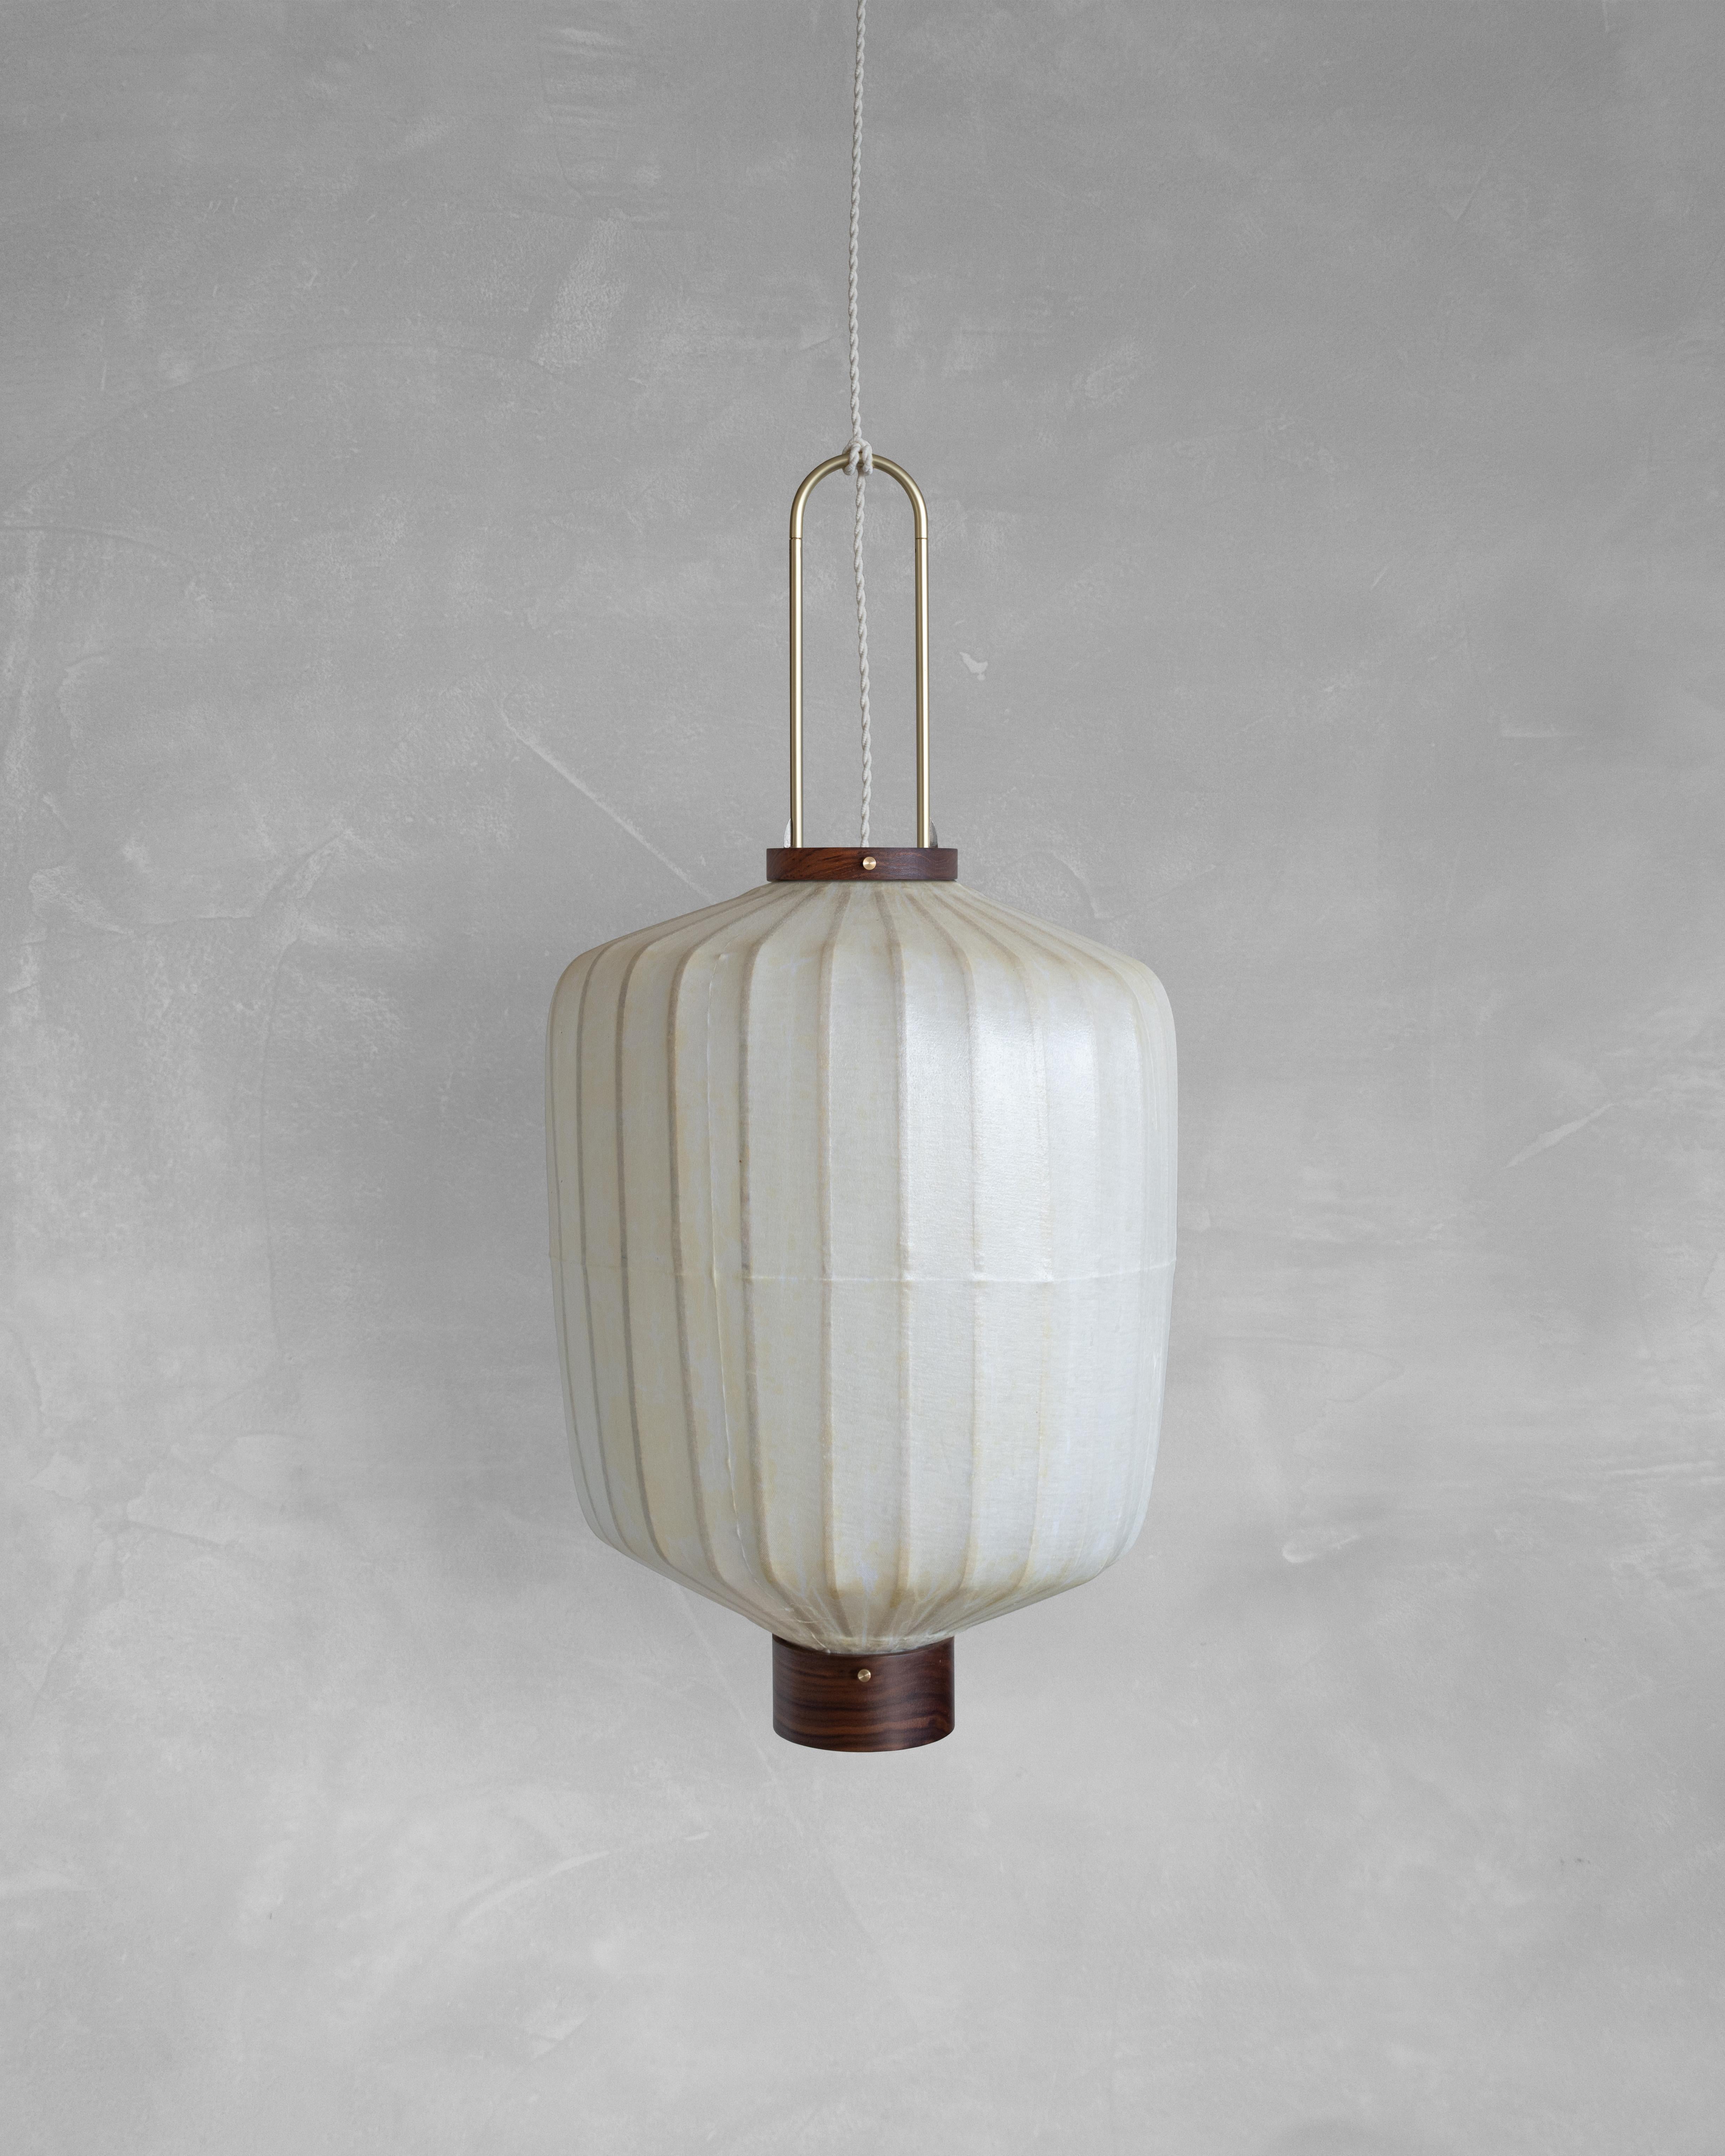 HU02B Pendant Lamp L by Taiwan Lantern
Dimensions: D 42 x W 42 x H 52 cm.
Material: Walnut & bamboo frame, Hand-colored fabrics, Metal pipes, Leather lace, Handmade porcelain ceiling cap.


This brown color is inspired by Wu Xing 五行. Brown presents